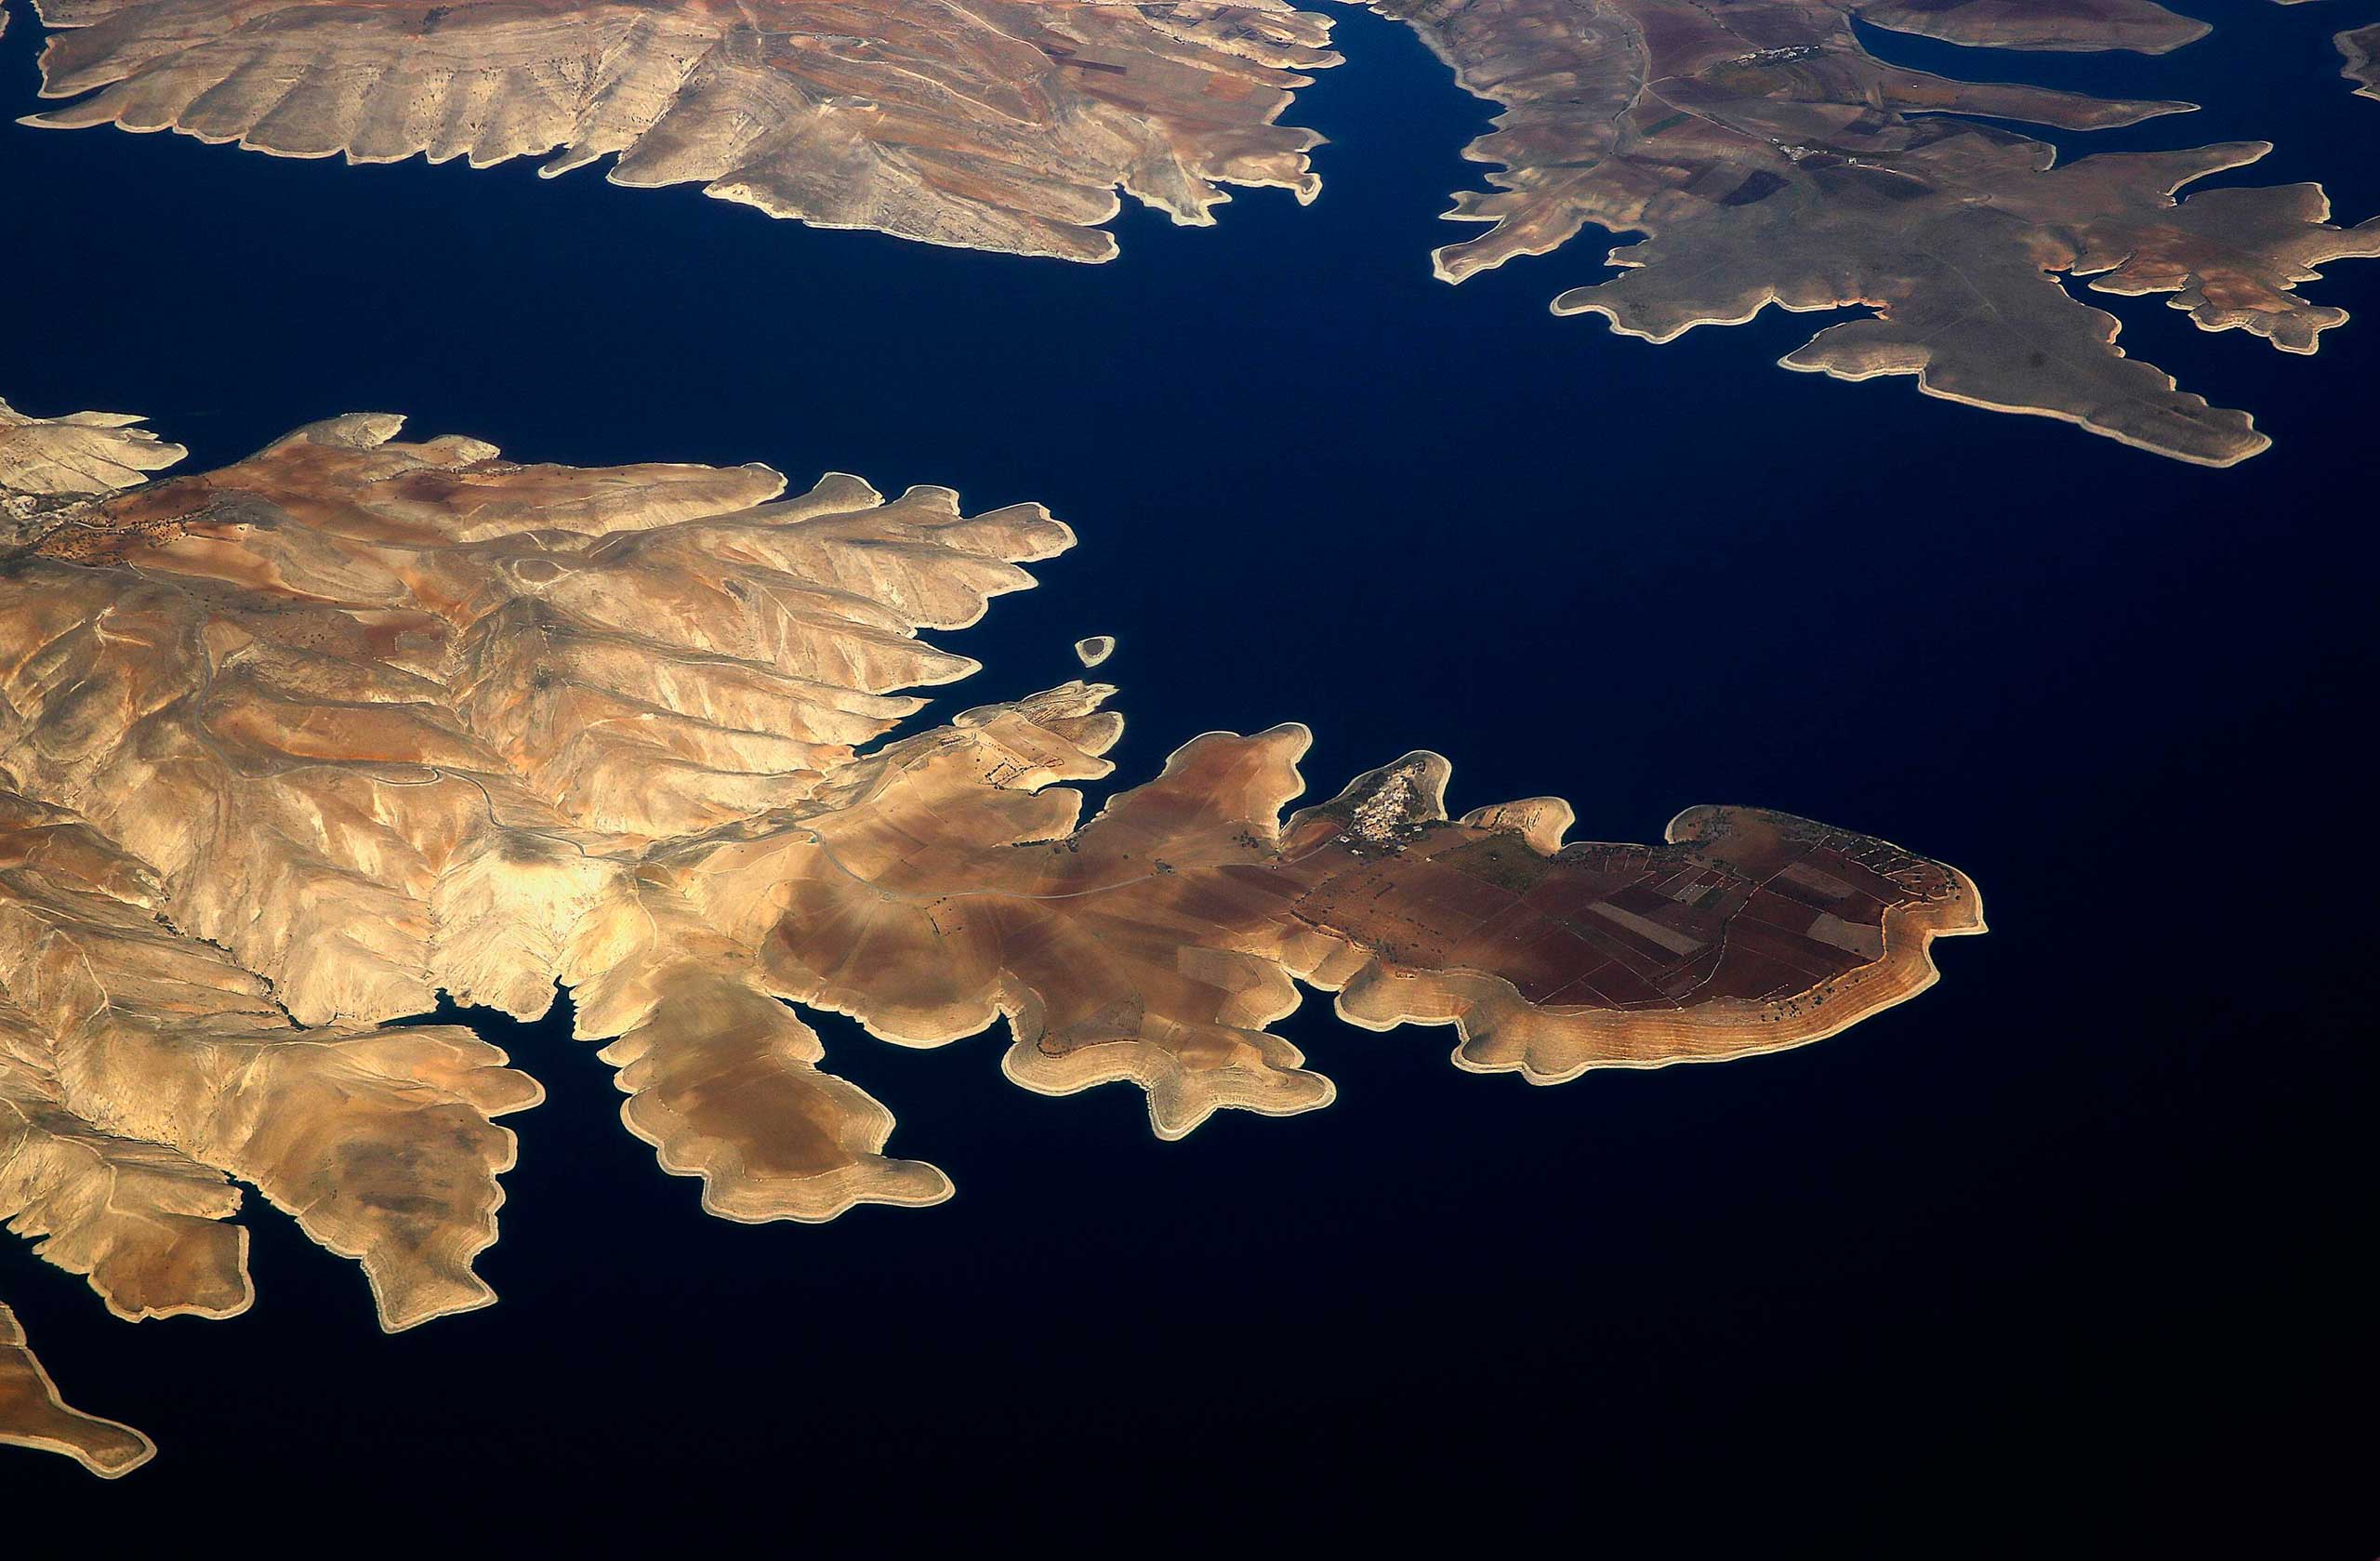 Nov. 10, 2014. The town of Susuz is seen on the northern shore of the Ataturk dam through the window of a passenger aircraft flying over south-eastern Turkey province of Adiyaman.